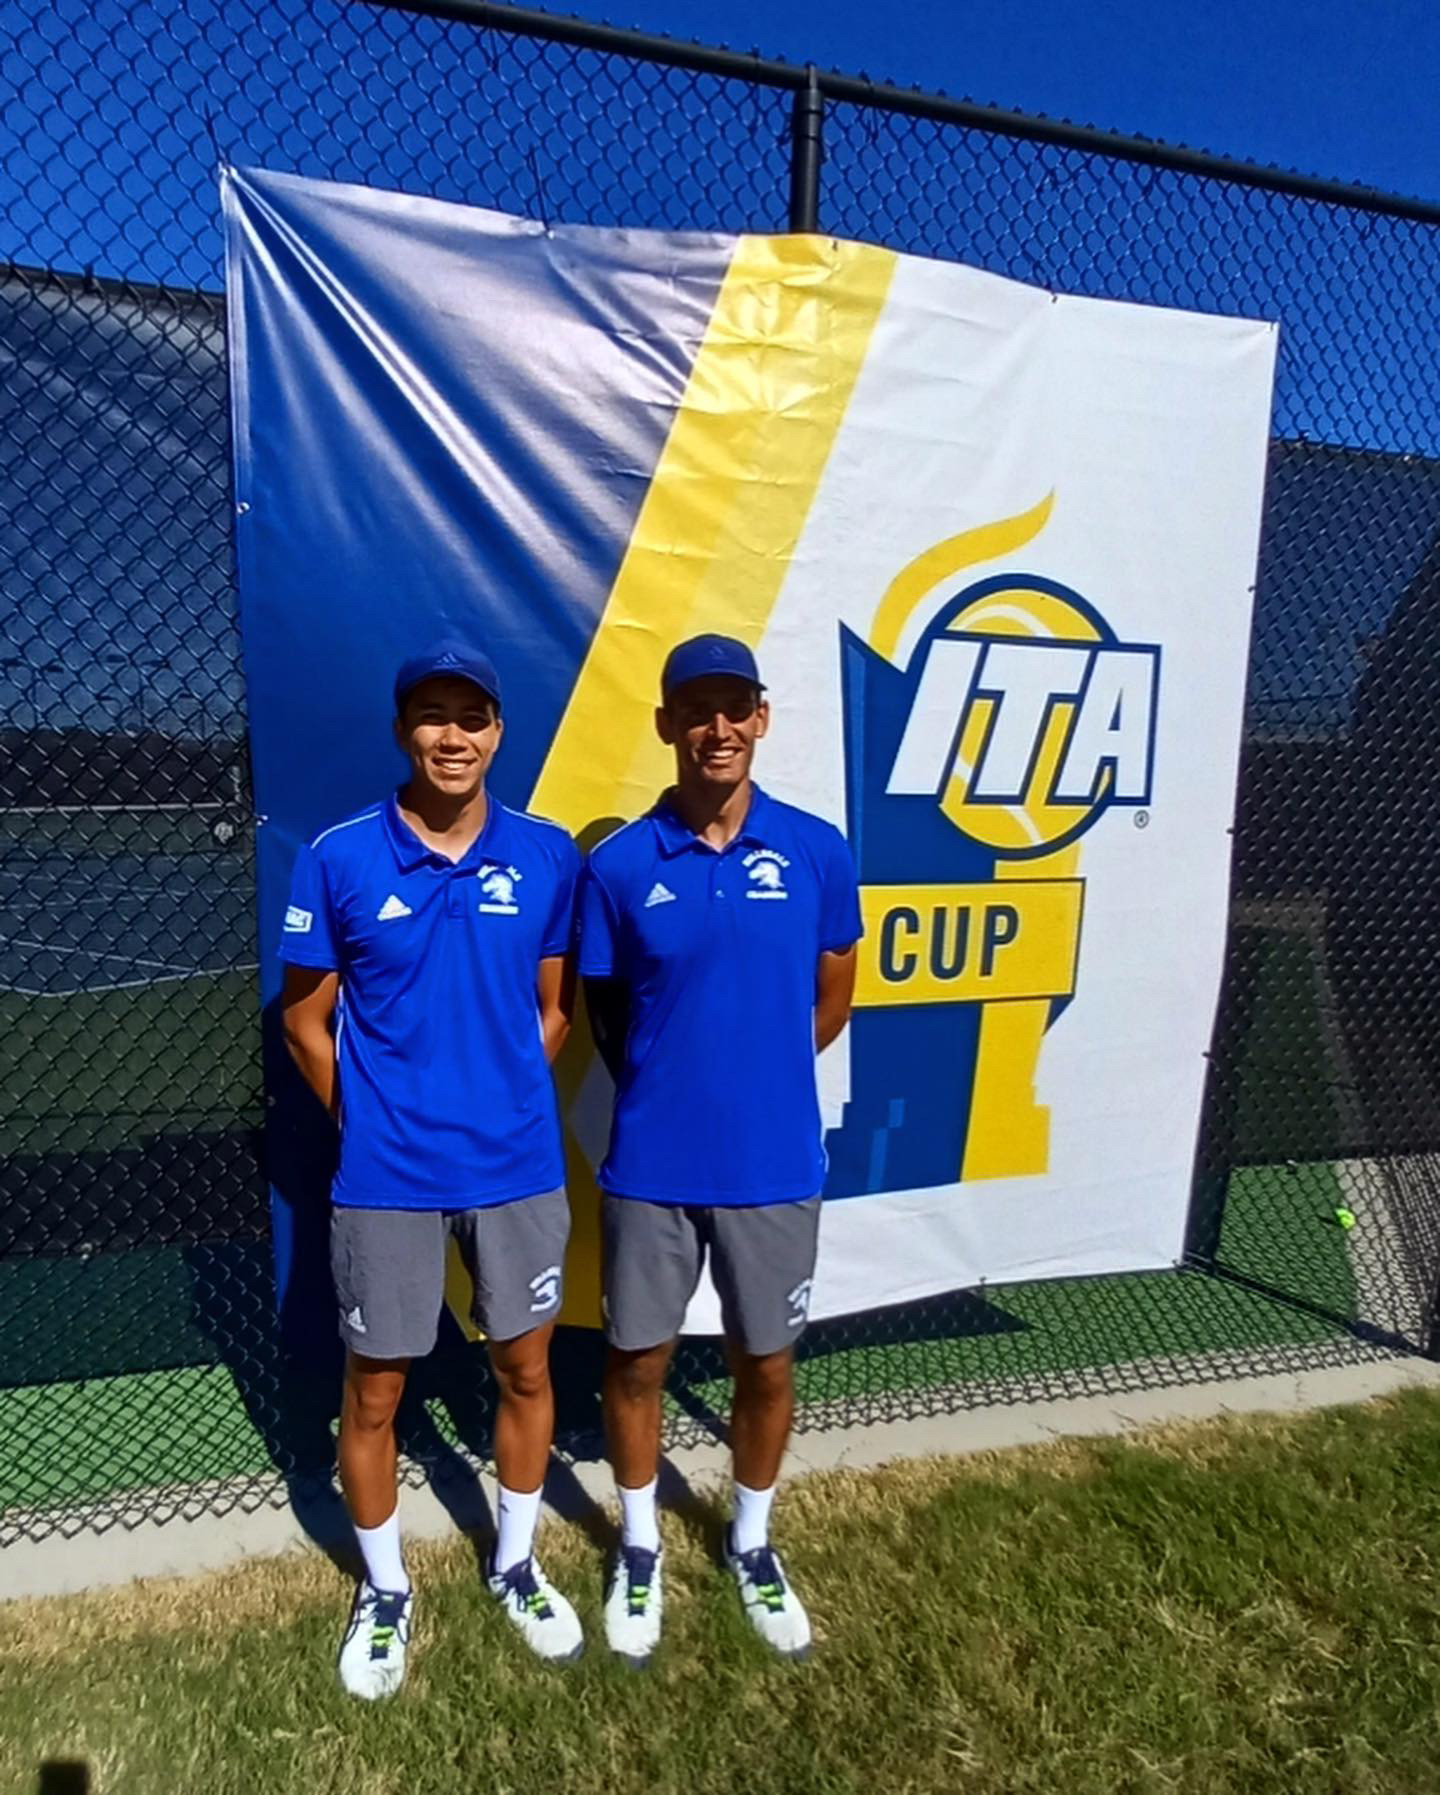 Cimpeanu, Barstow make program history: compete in first ever ITA Cup